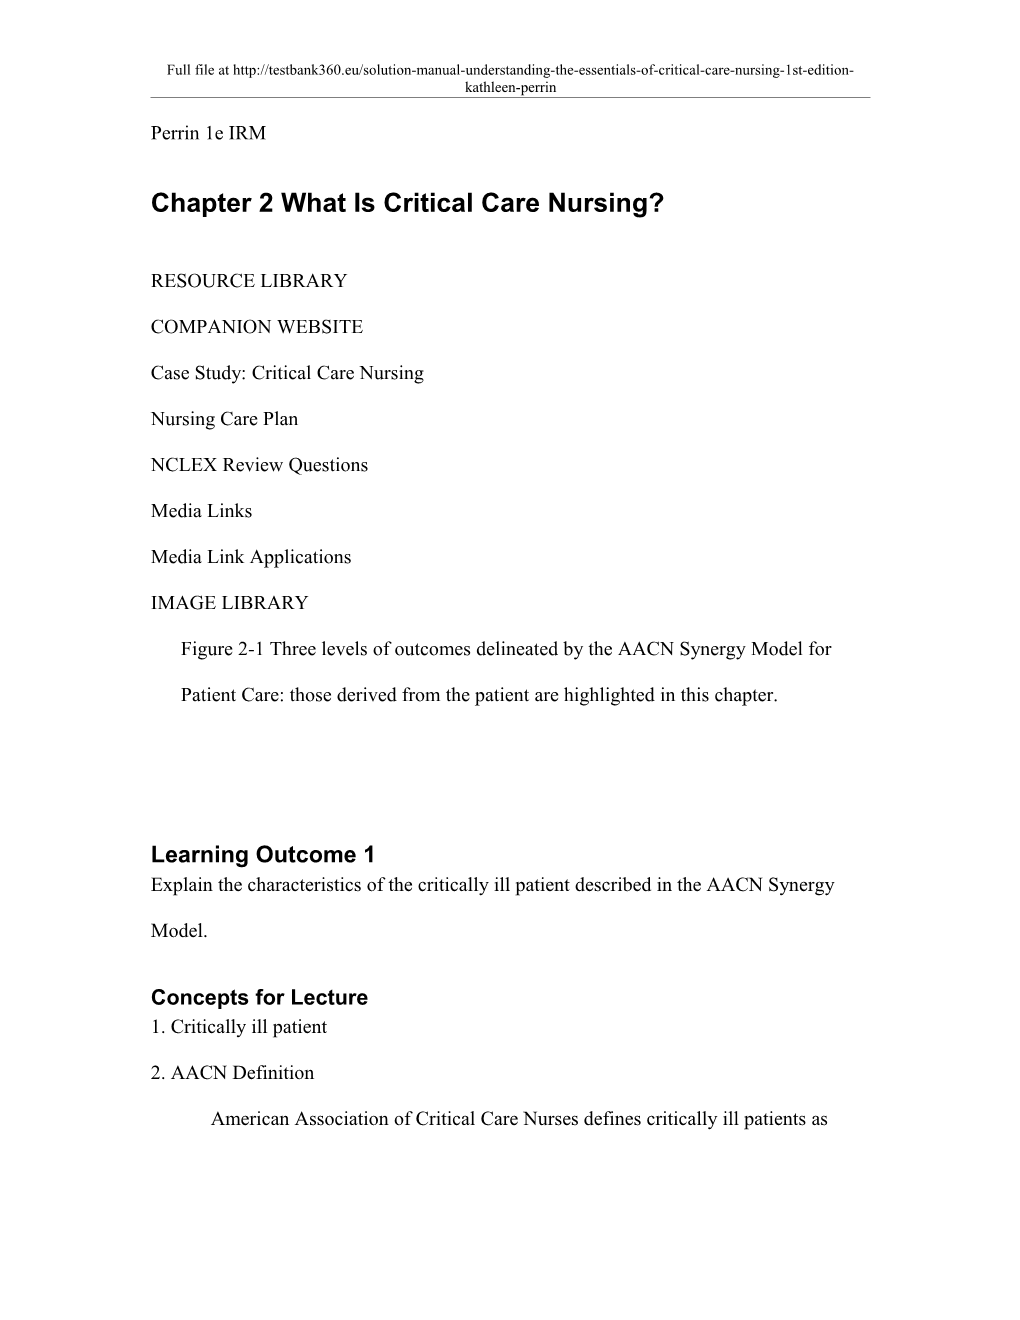 Chapter 2 Care of the Critically Ill Patient